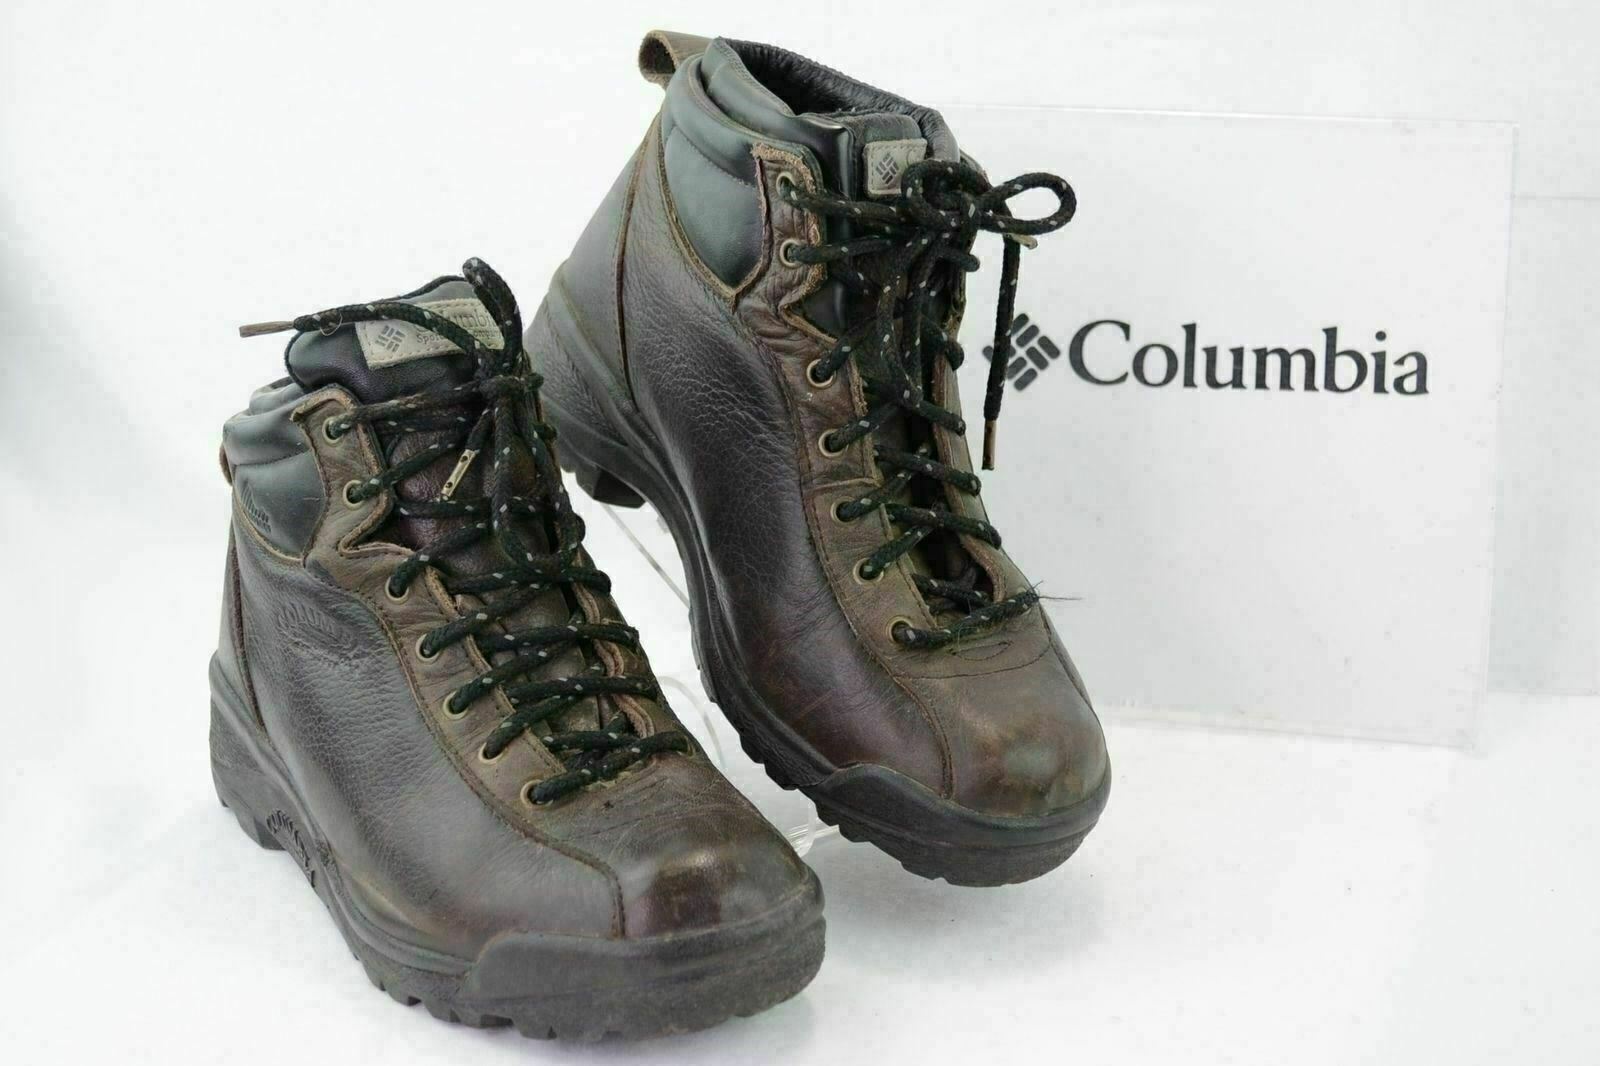 COLUMBIA Glacier Chocolate Mens 8 Lace up Ankle Hiking Waterproof Boots A050